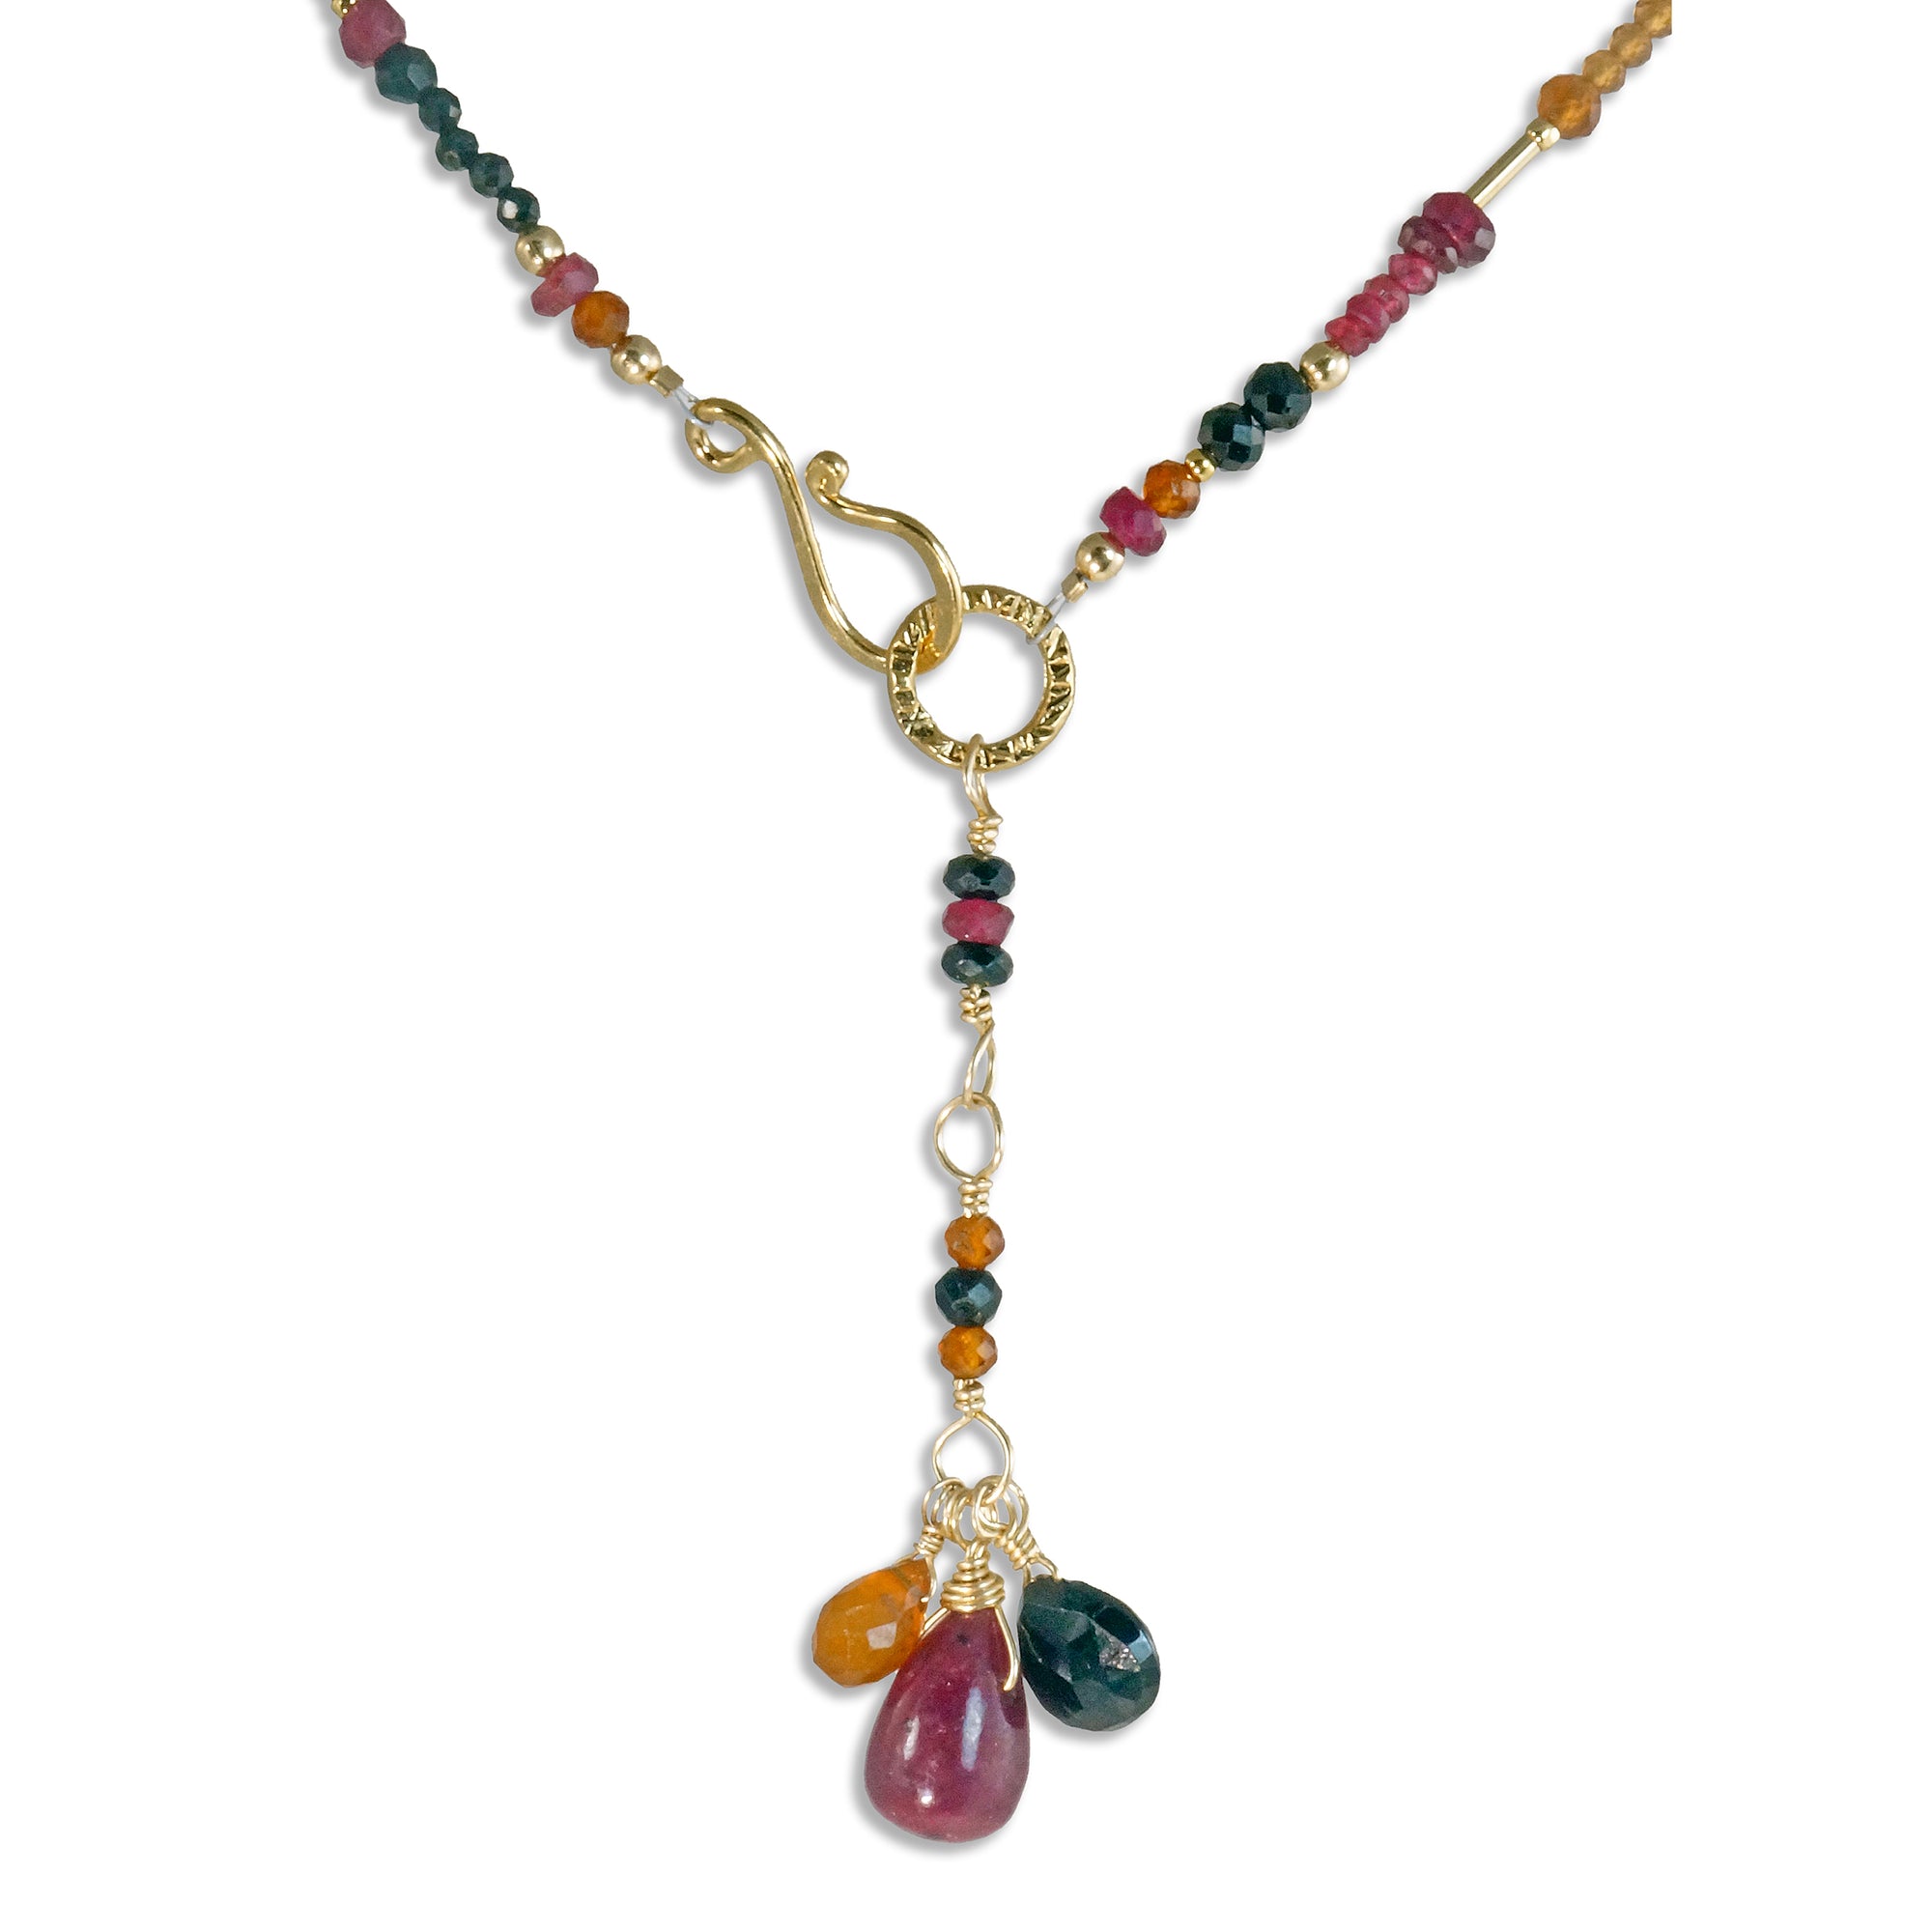 Multi Gemstone Necklace with Spinel, Hessonite, Ruby in Gold